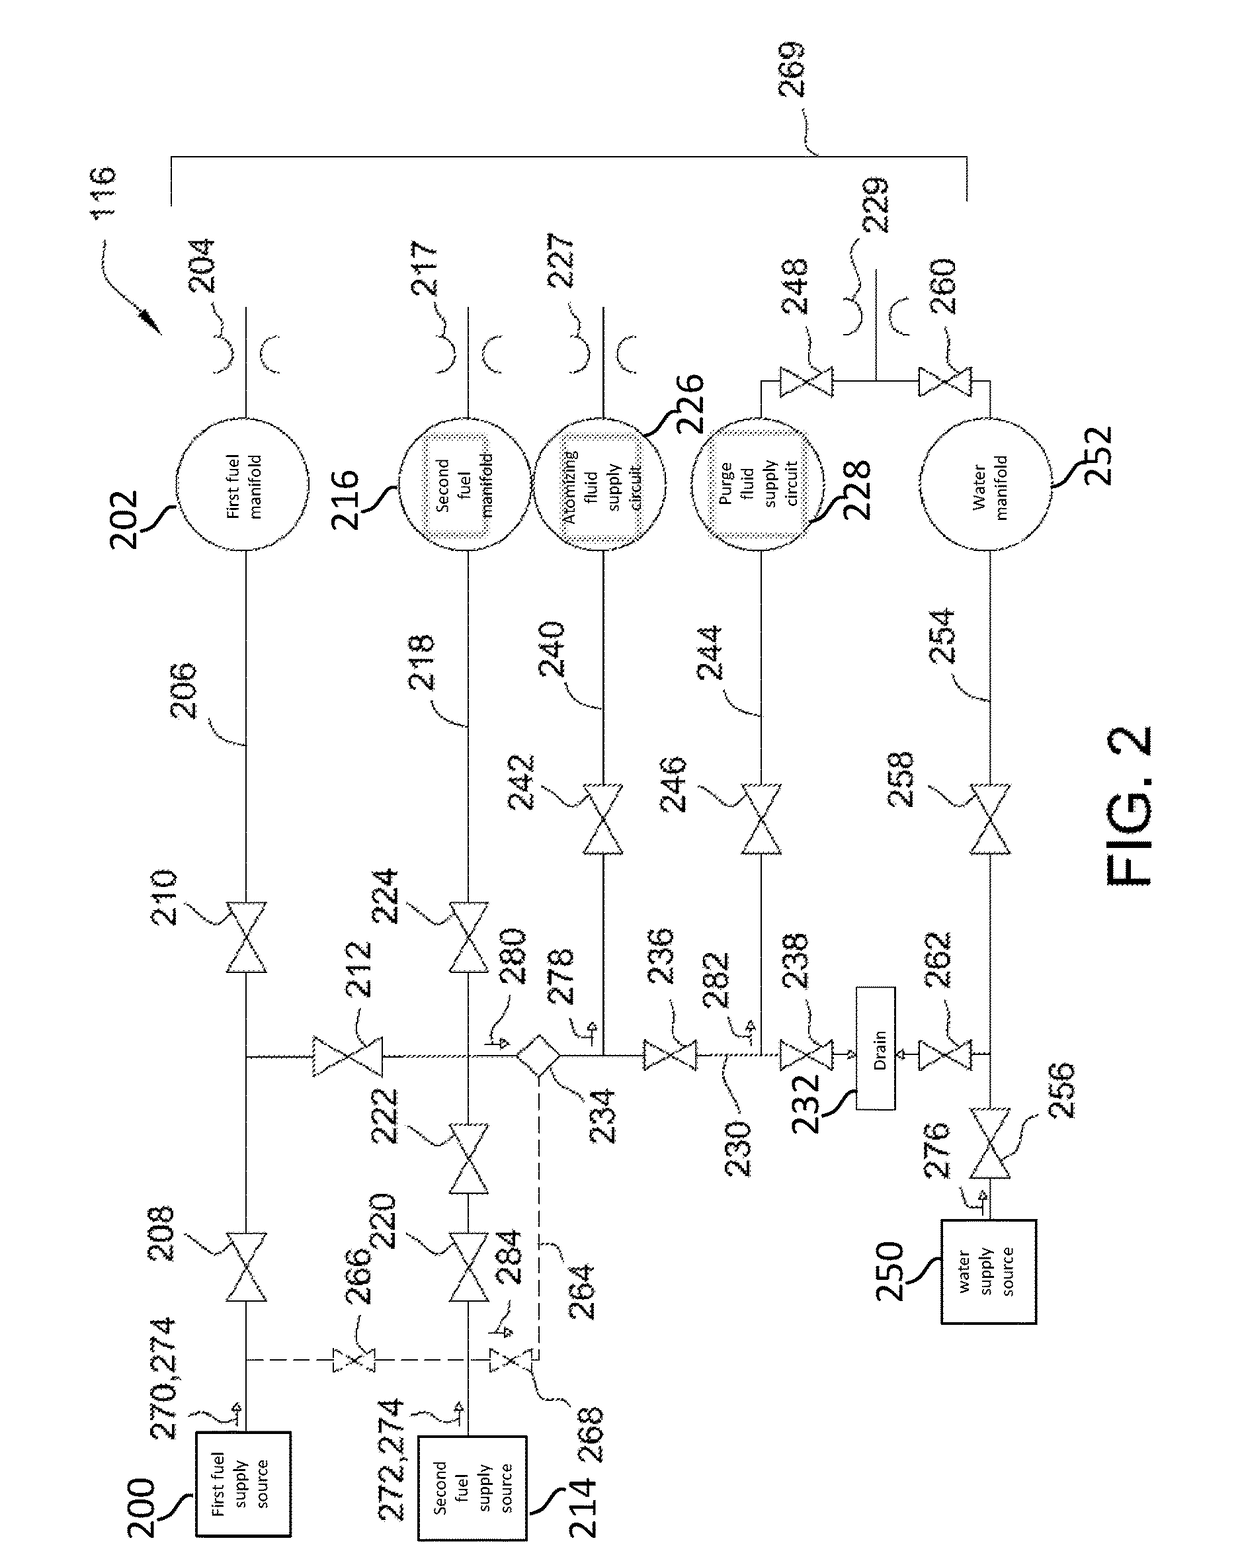 Fuel supply system for turbine engines and methods of assembling same